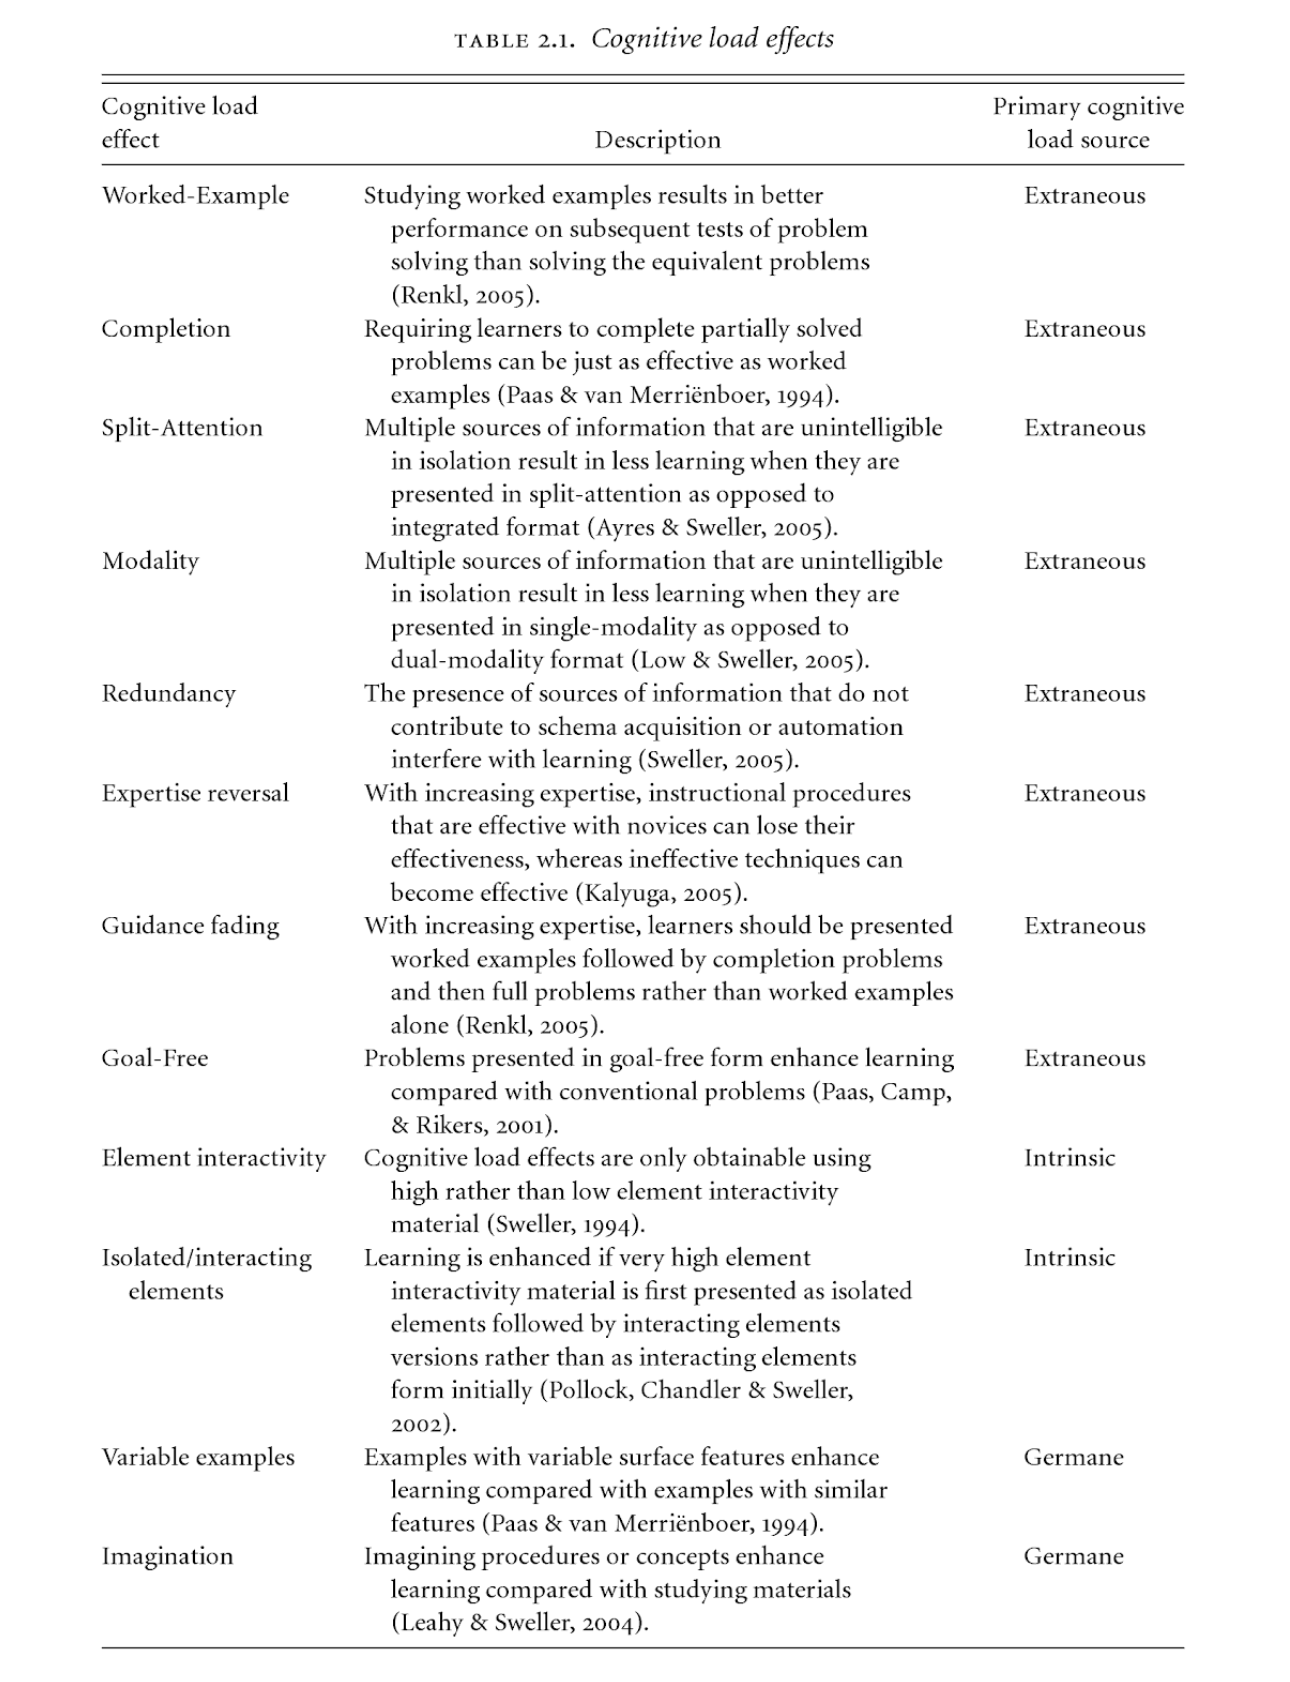 table of human cognition and learning modalities